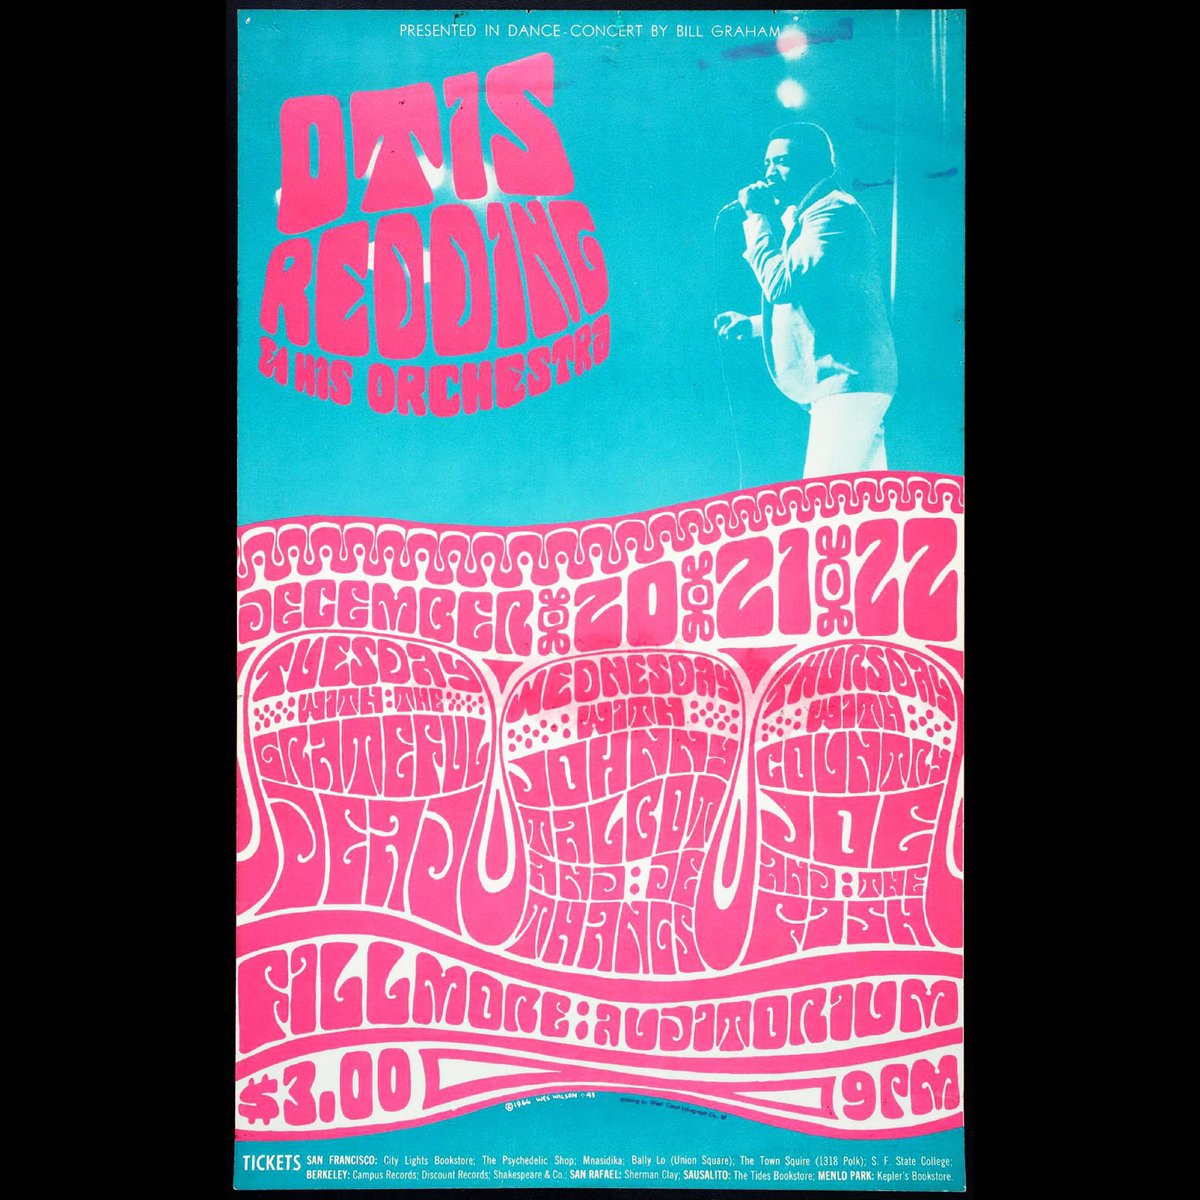 Presented In Dance Concert By Bill Graham: Otis Redding & His Orchestra with the Grateful Dead | December 20th, 1966 | Fillmore Auditorium | San Francisco, CA